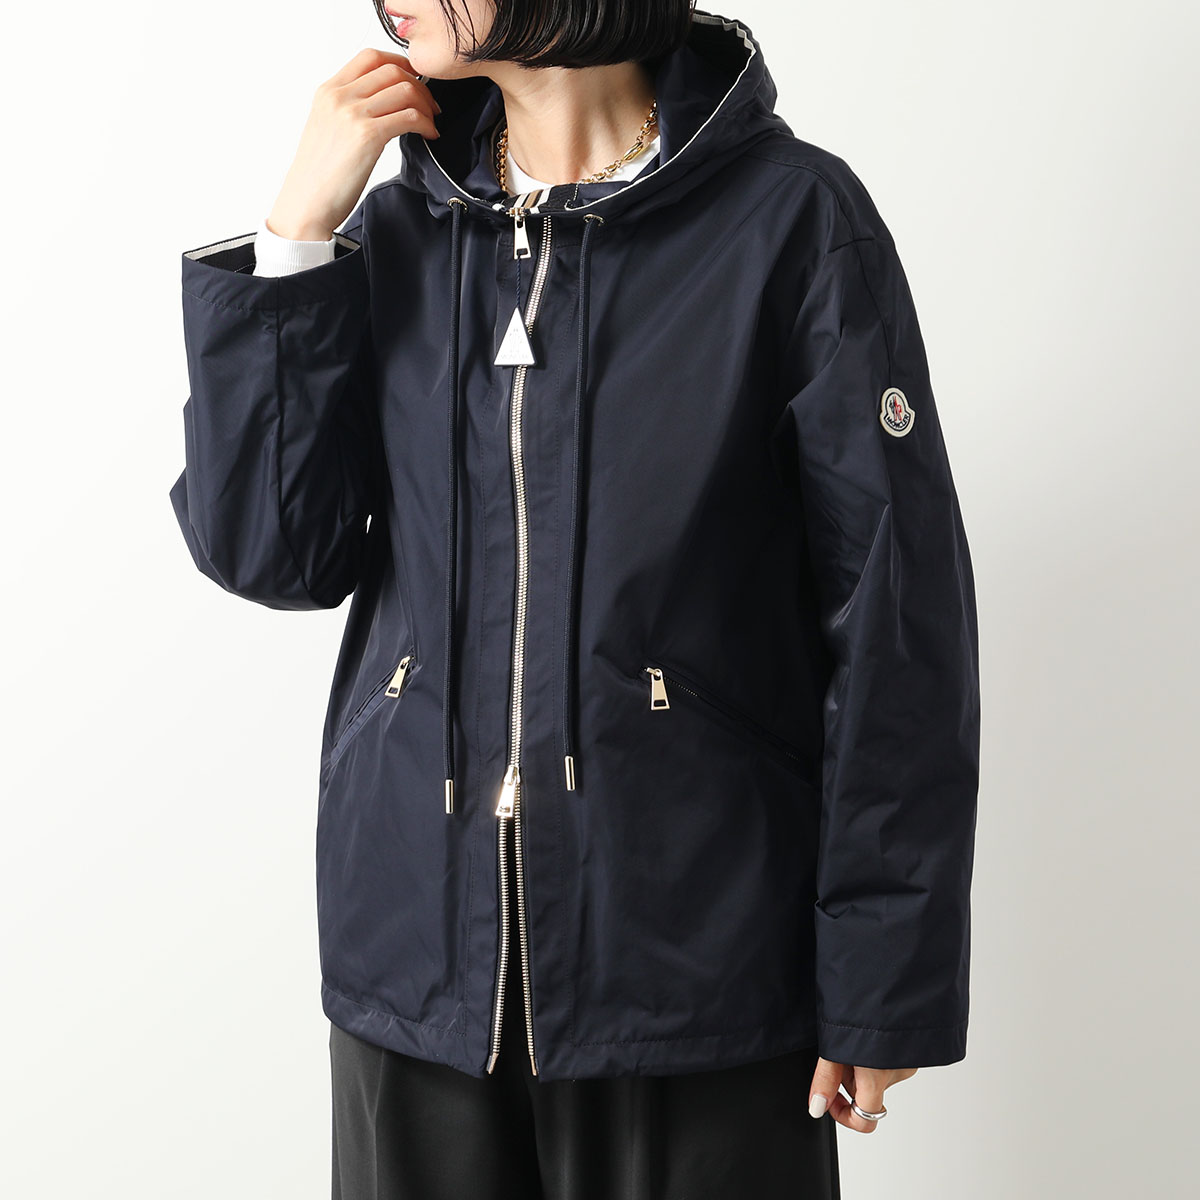 MONCLER ジャケット CASSIOPEA カシオペア 1A00060 54A1K レディース ...